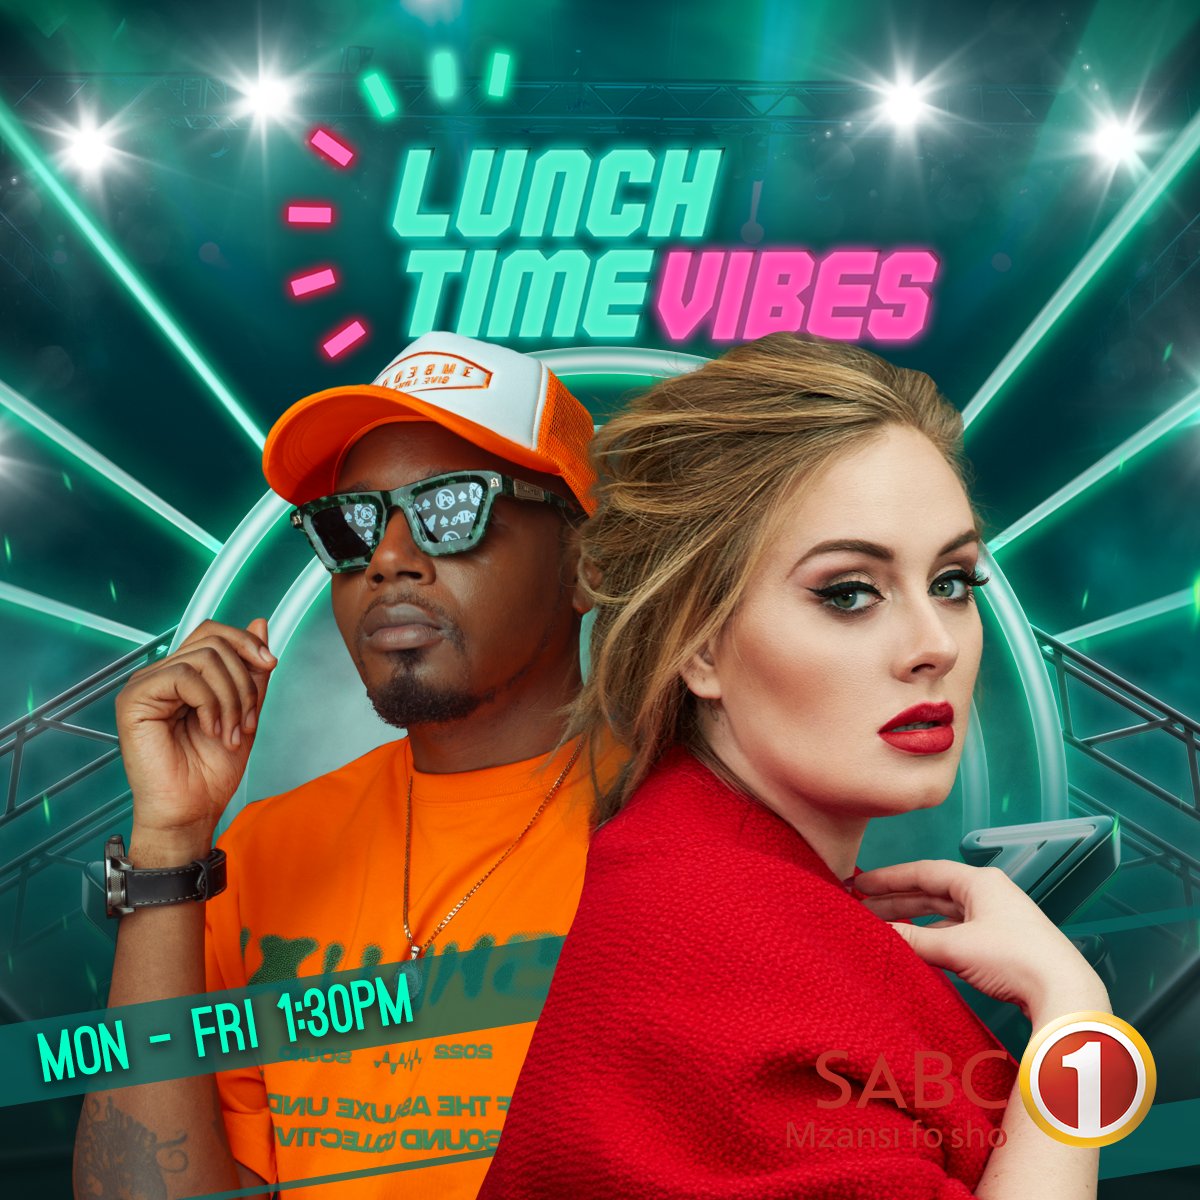 Craving a pick-me-up during your lunch hour? Look no further! Join us on Lunchtime Vibes exclusively on @Official_SABC1 - Mzansi Fo Sho every weekday at 1:30 PM. #SABC1AngekeBasekhone #LunchtimeVibes